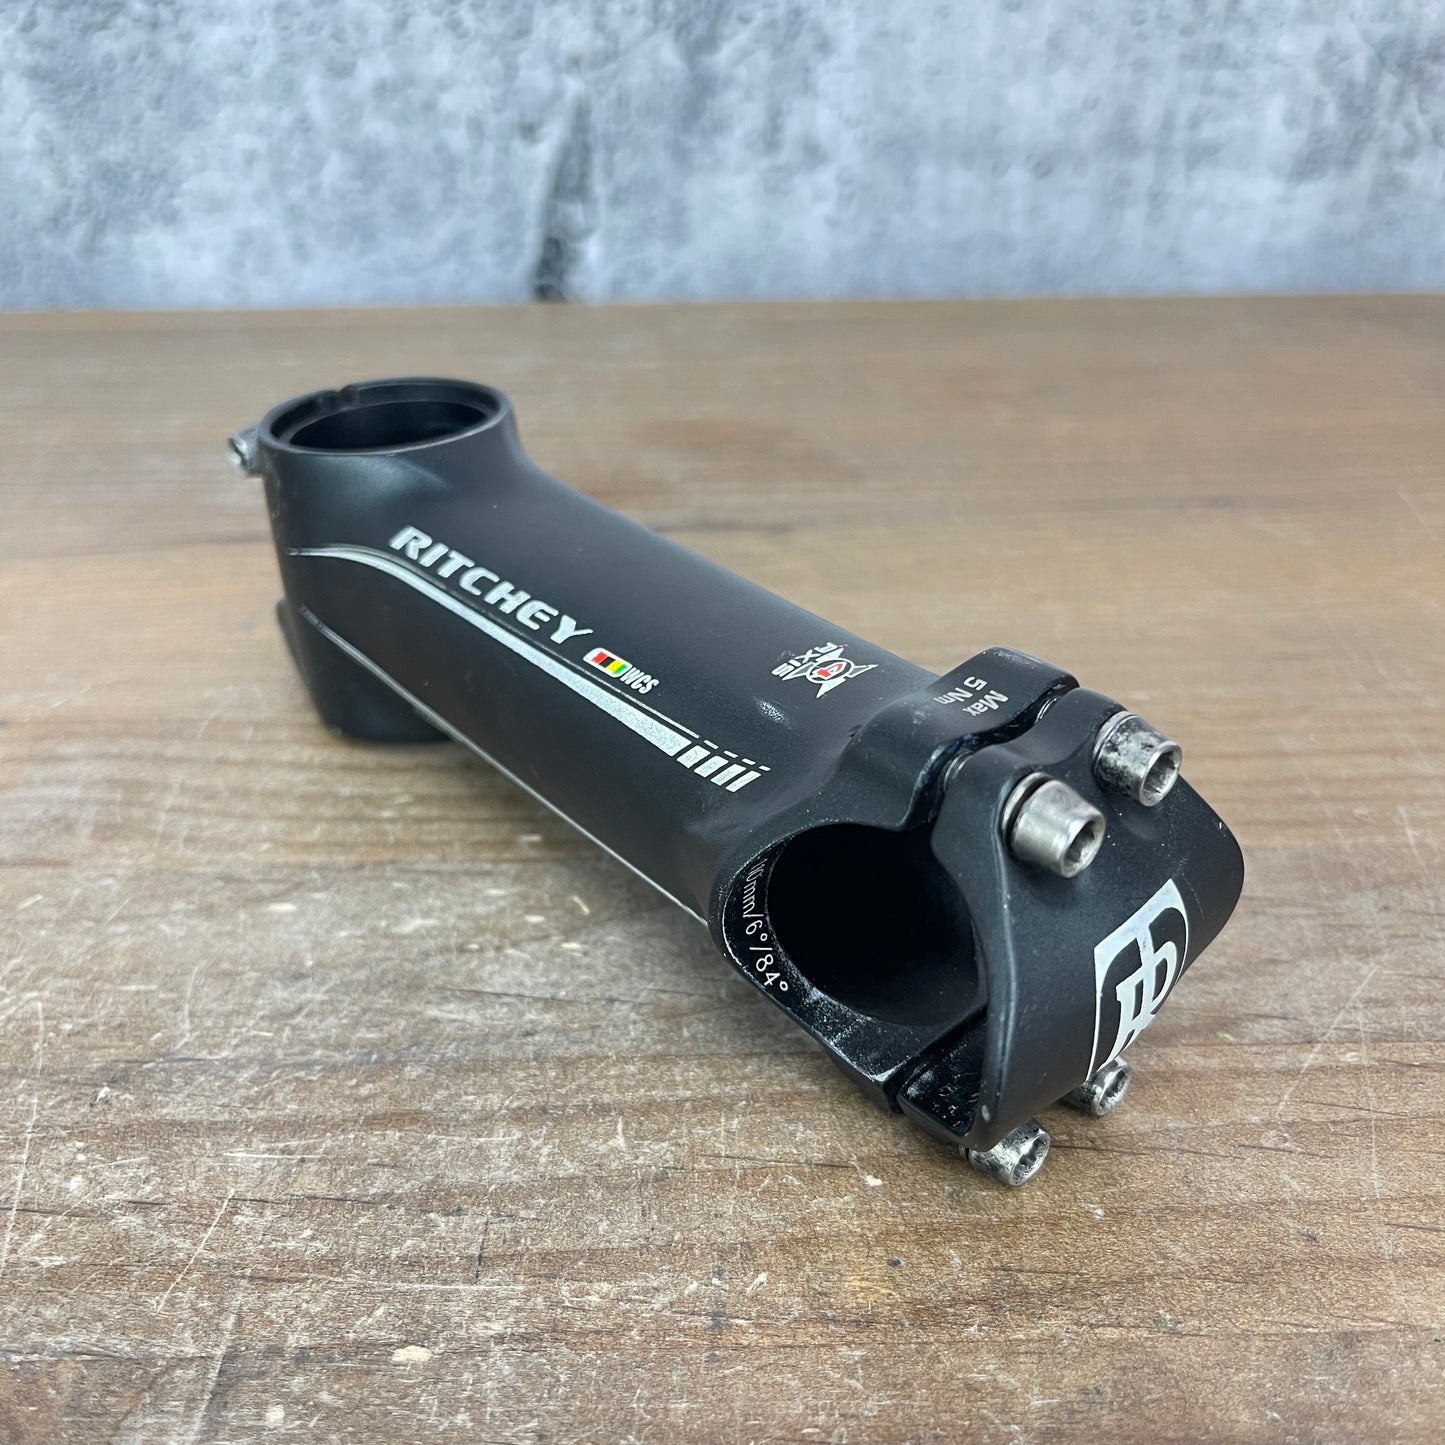 Ritchey 4 Axis 110mm ±6 Degree Angle Alloy Road Bike Stem Black 150g for 1 1/4"